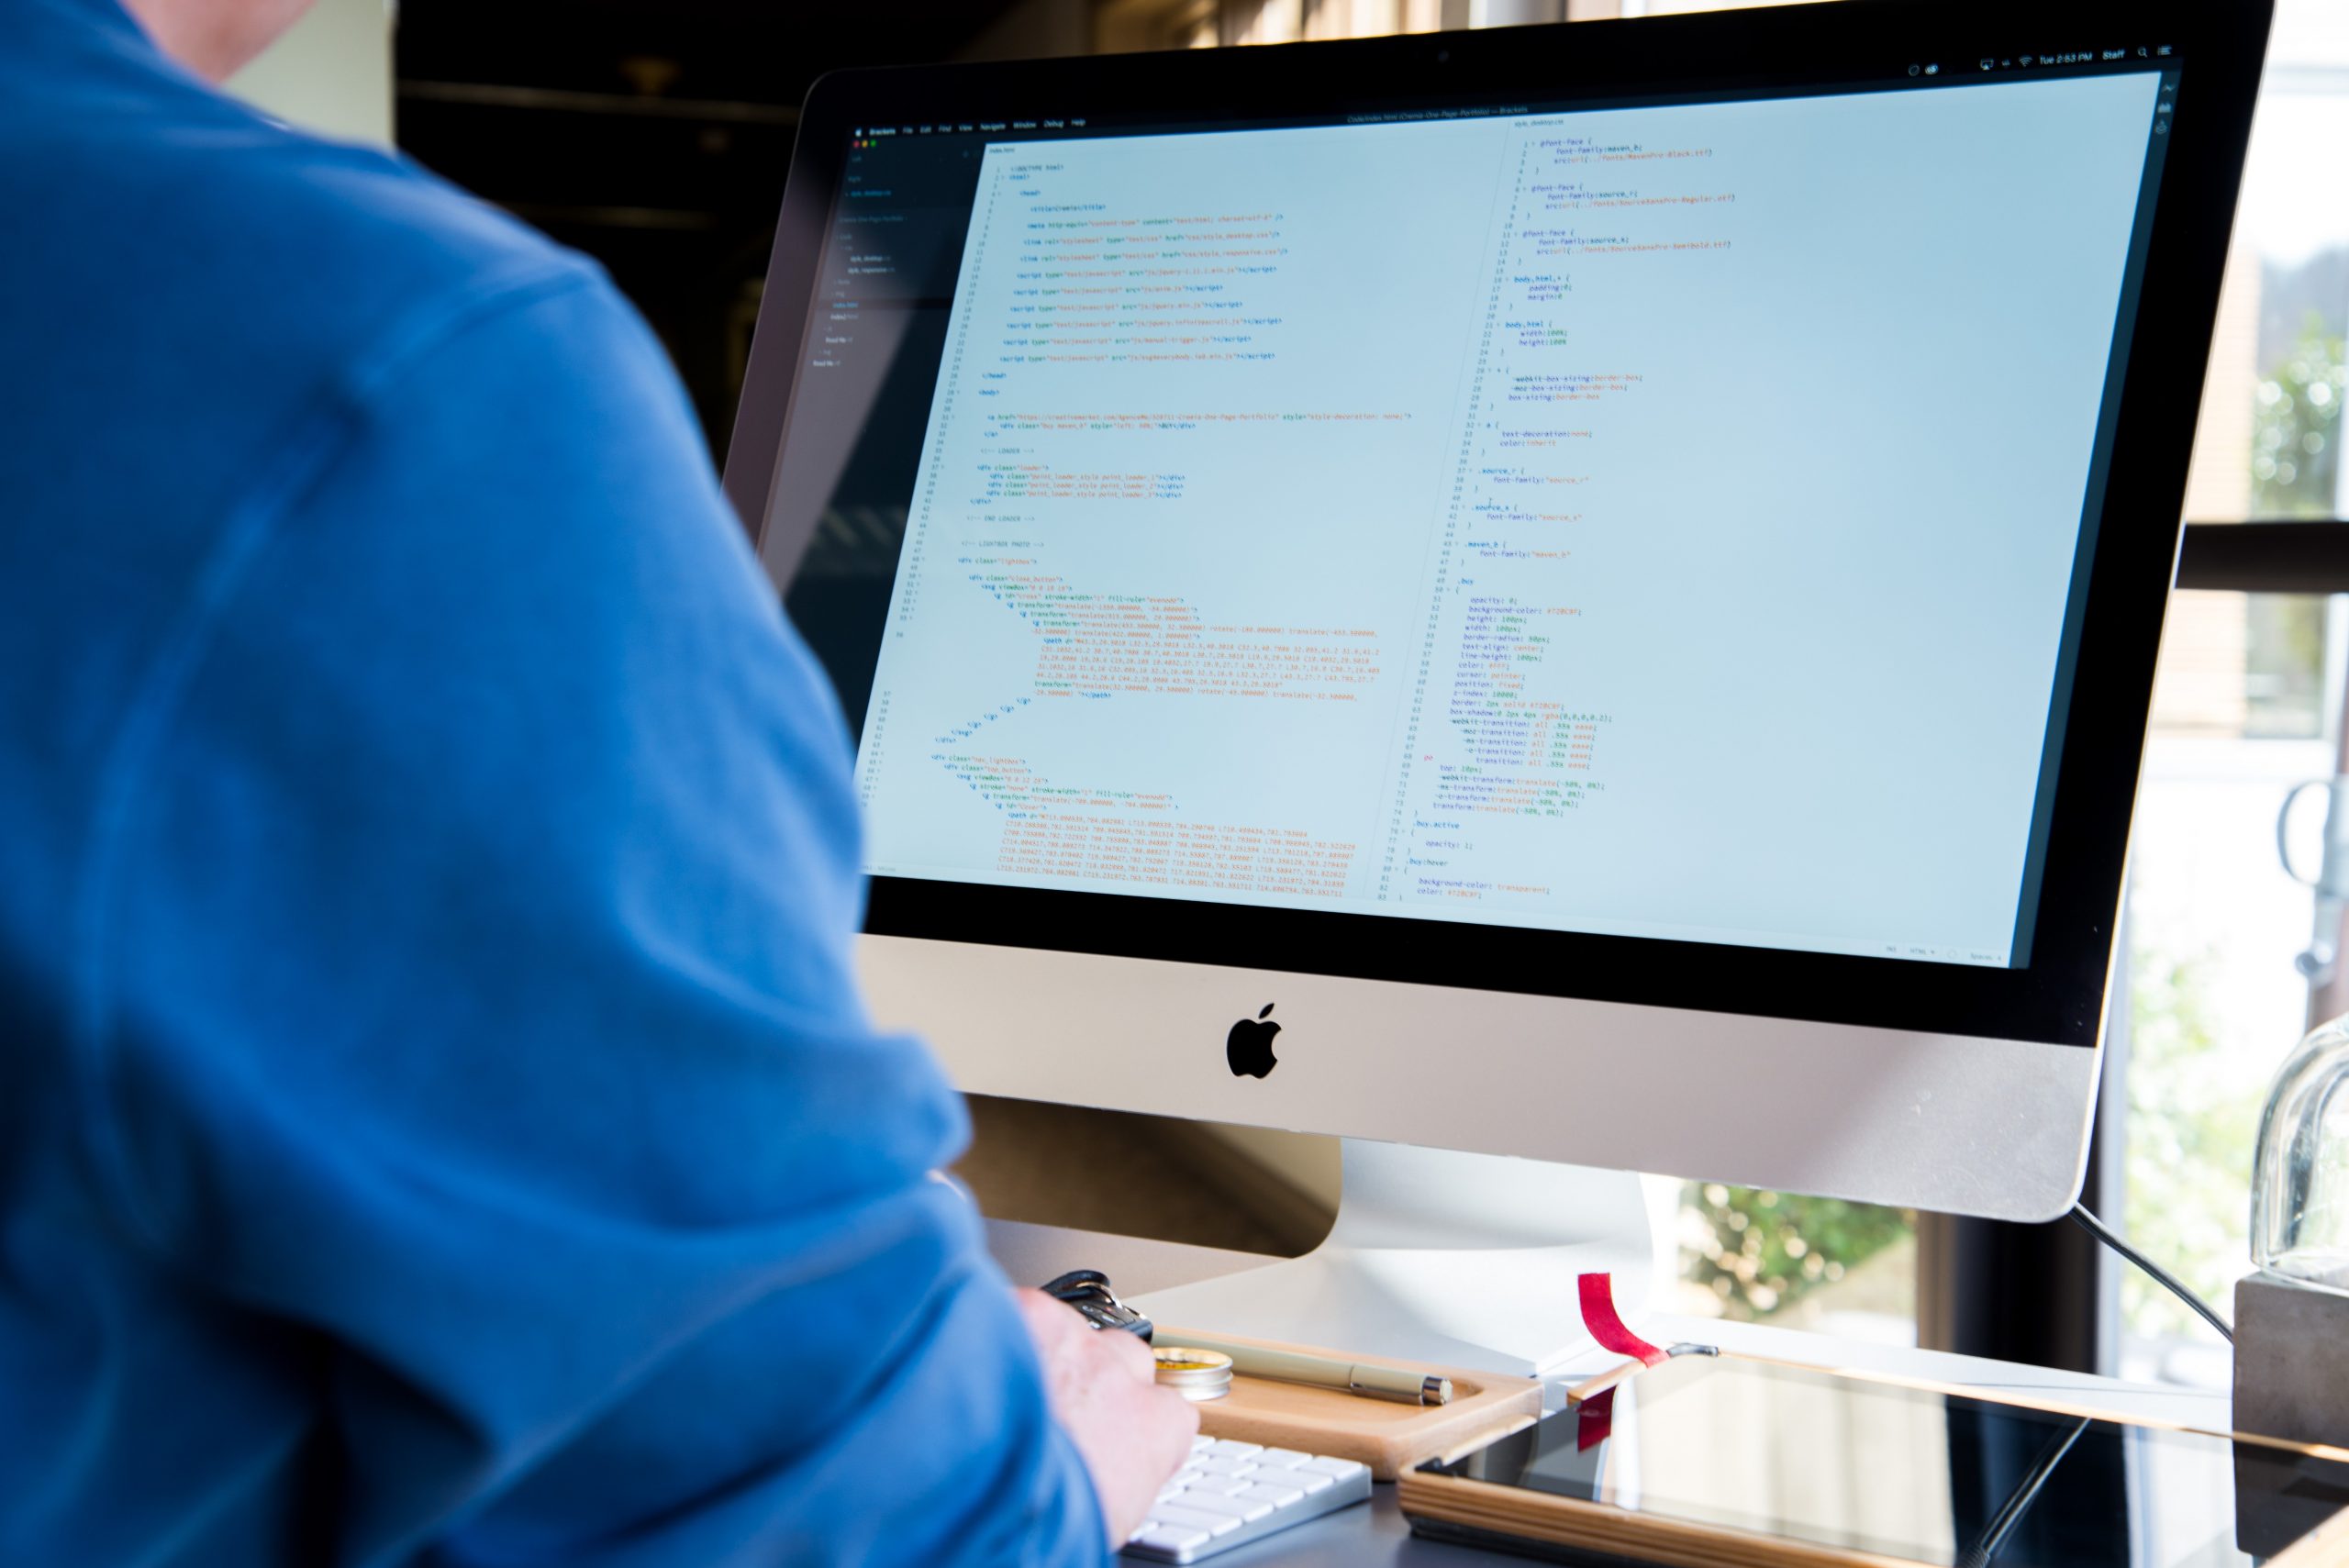 10 Best HTML Editors for Your Mac